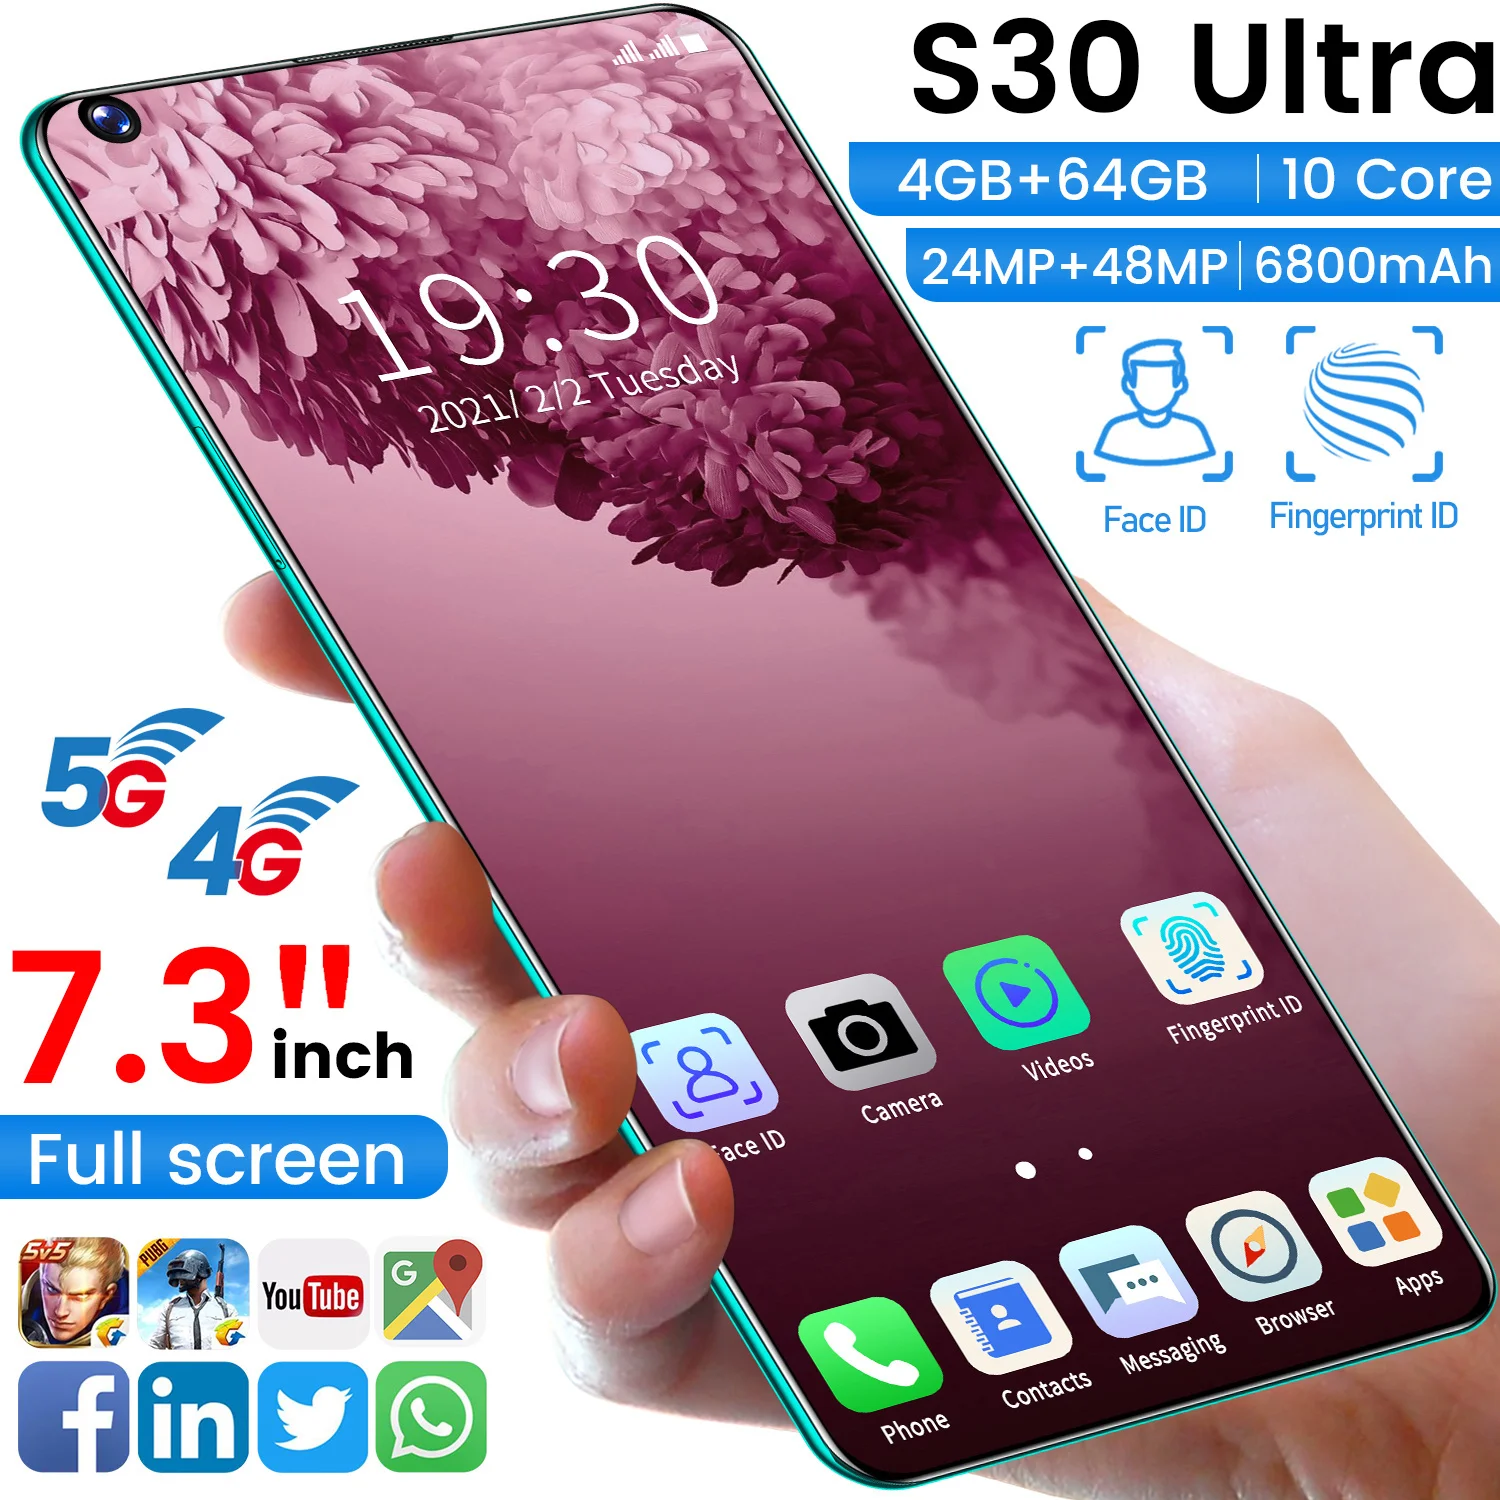 

2021 Latest S30U with 7.3-inch Full Screen smartphone 4g Android10.0 4+64GB Mobile Phone 6800mAh Deca Core 24+48MP Gaming Mobile, Green/gold/silver